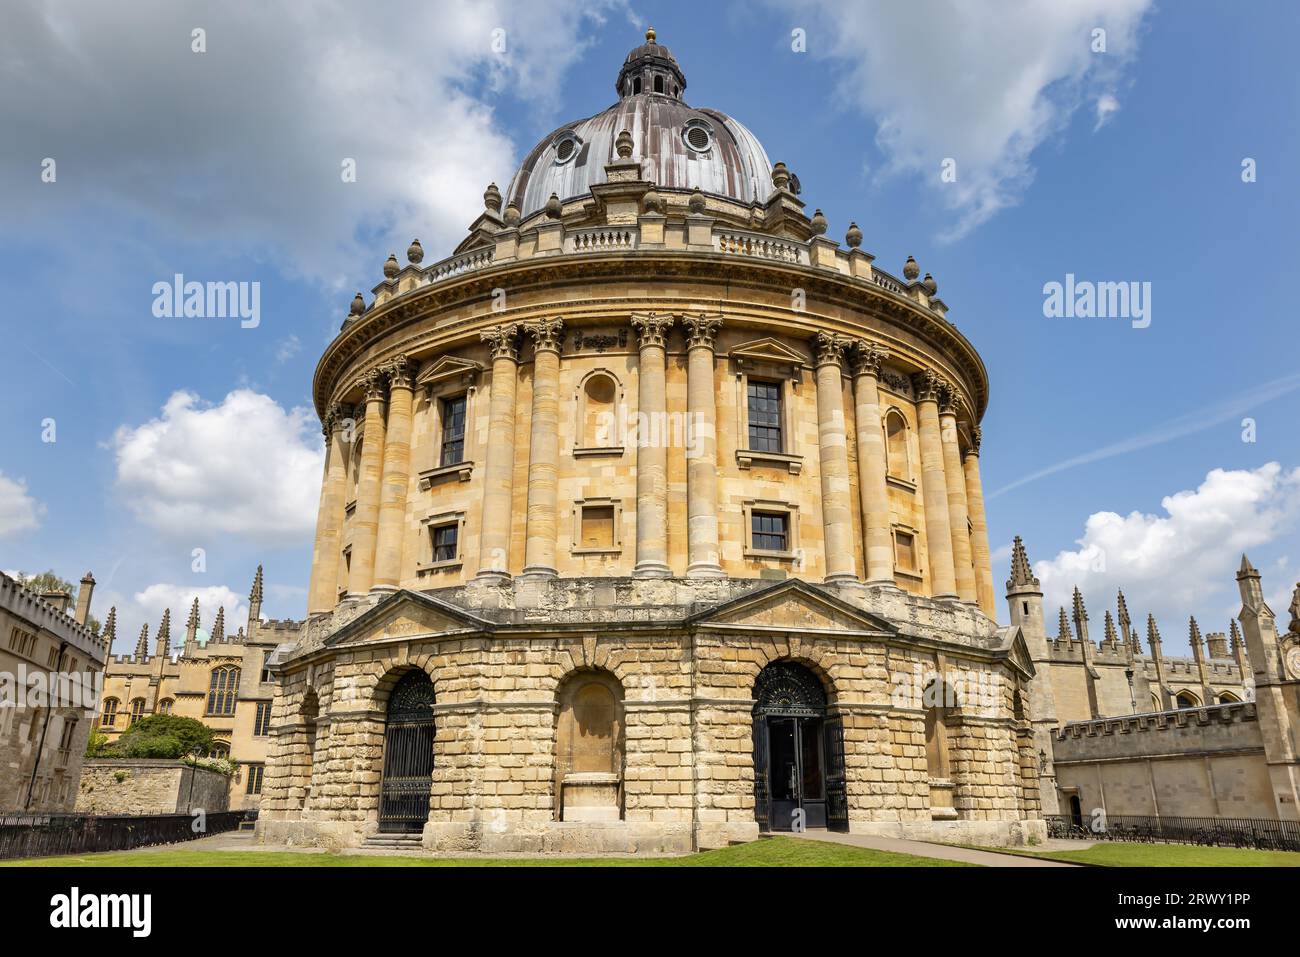 The Radcliffe Camera known as the Rad Cam or the Camera, a building of the University of Oxford, England. Its circularity and position in the heart of Stock Photo